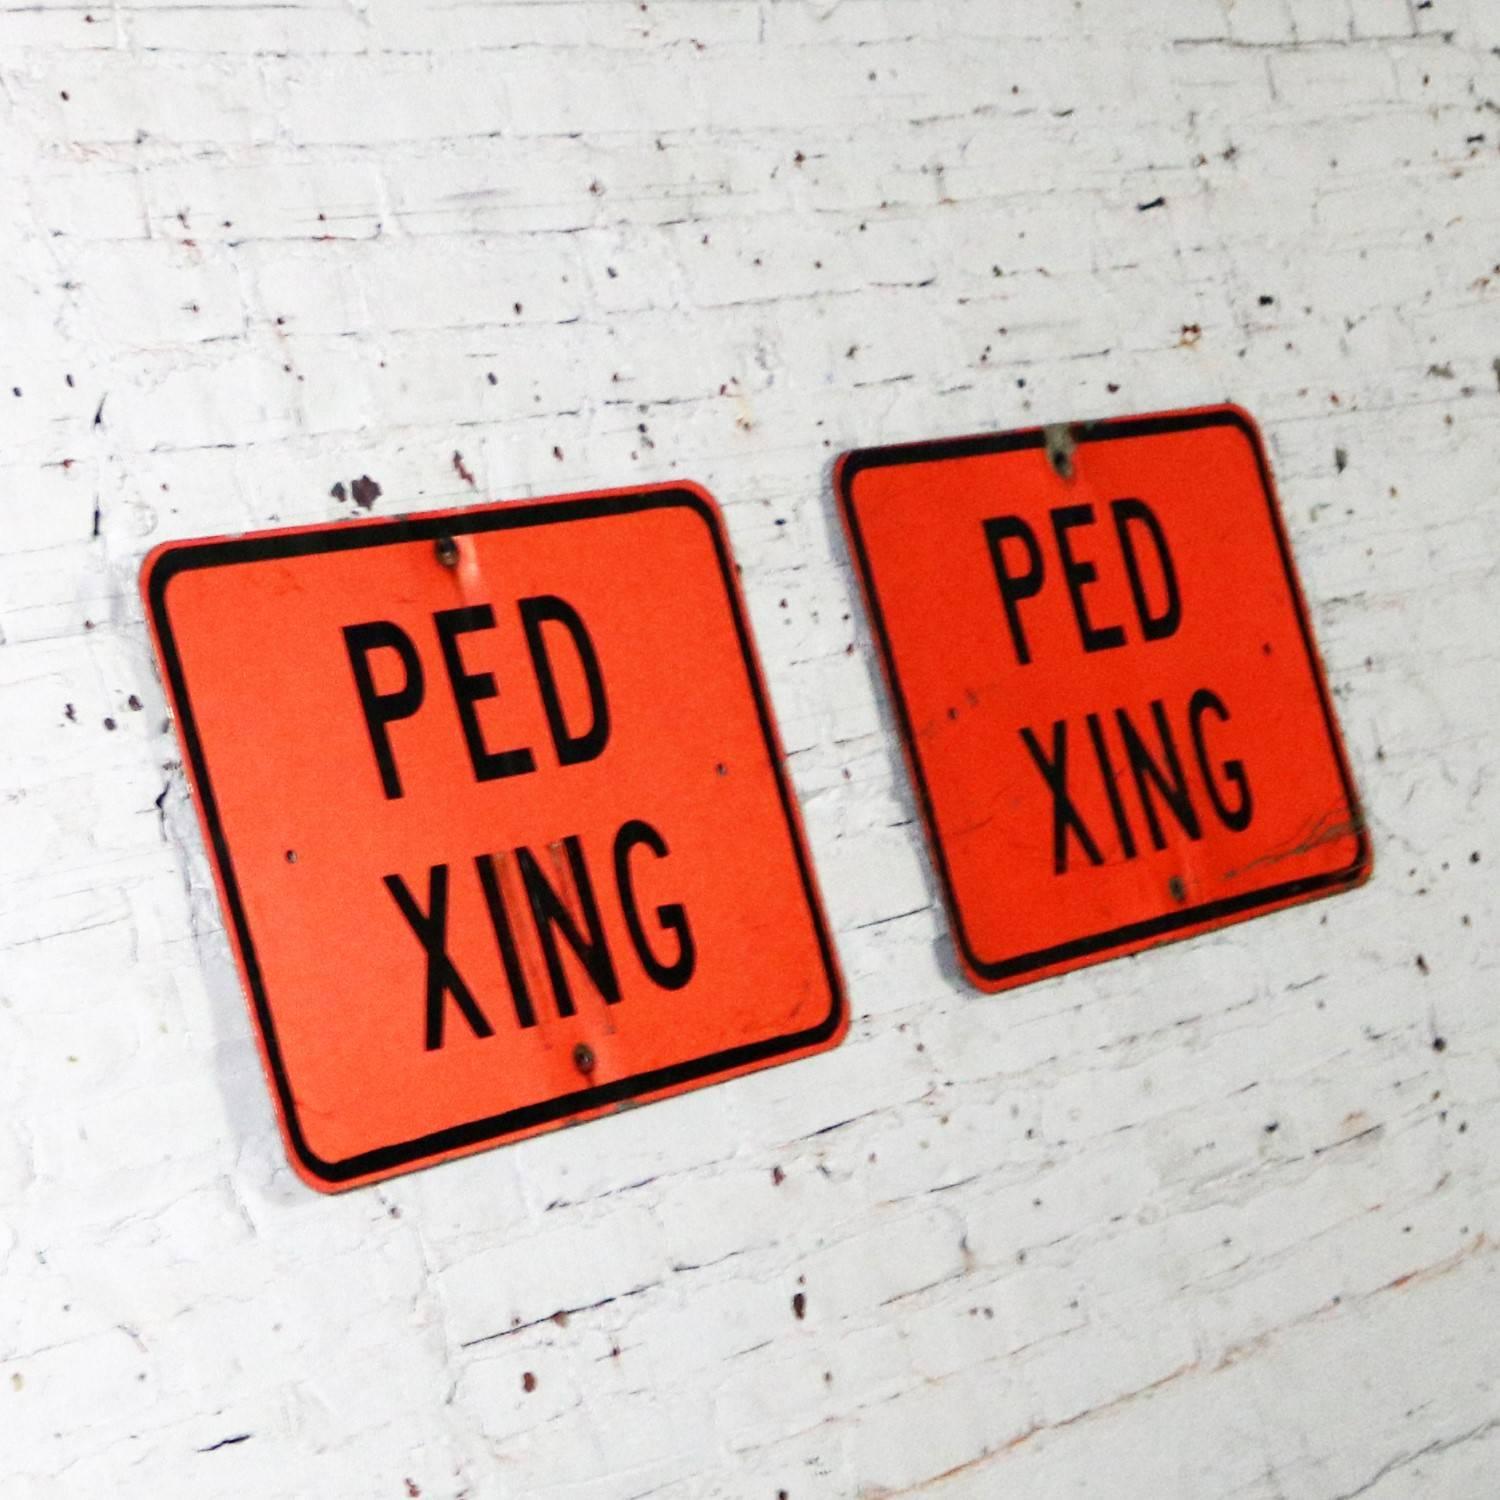 Industrial Vintage Ped Xing Florescent Orange Metal Traffic Signs For Sale